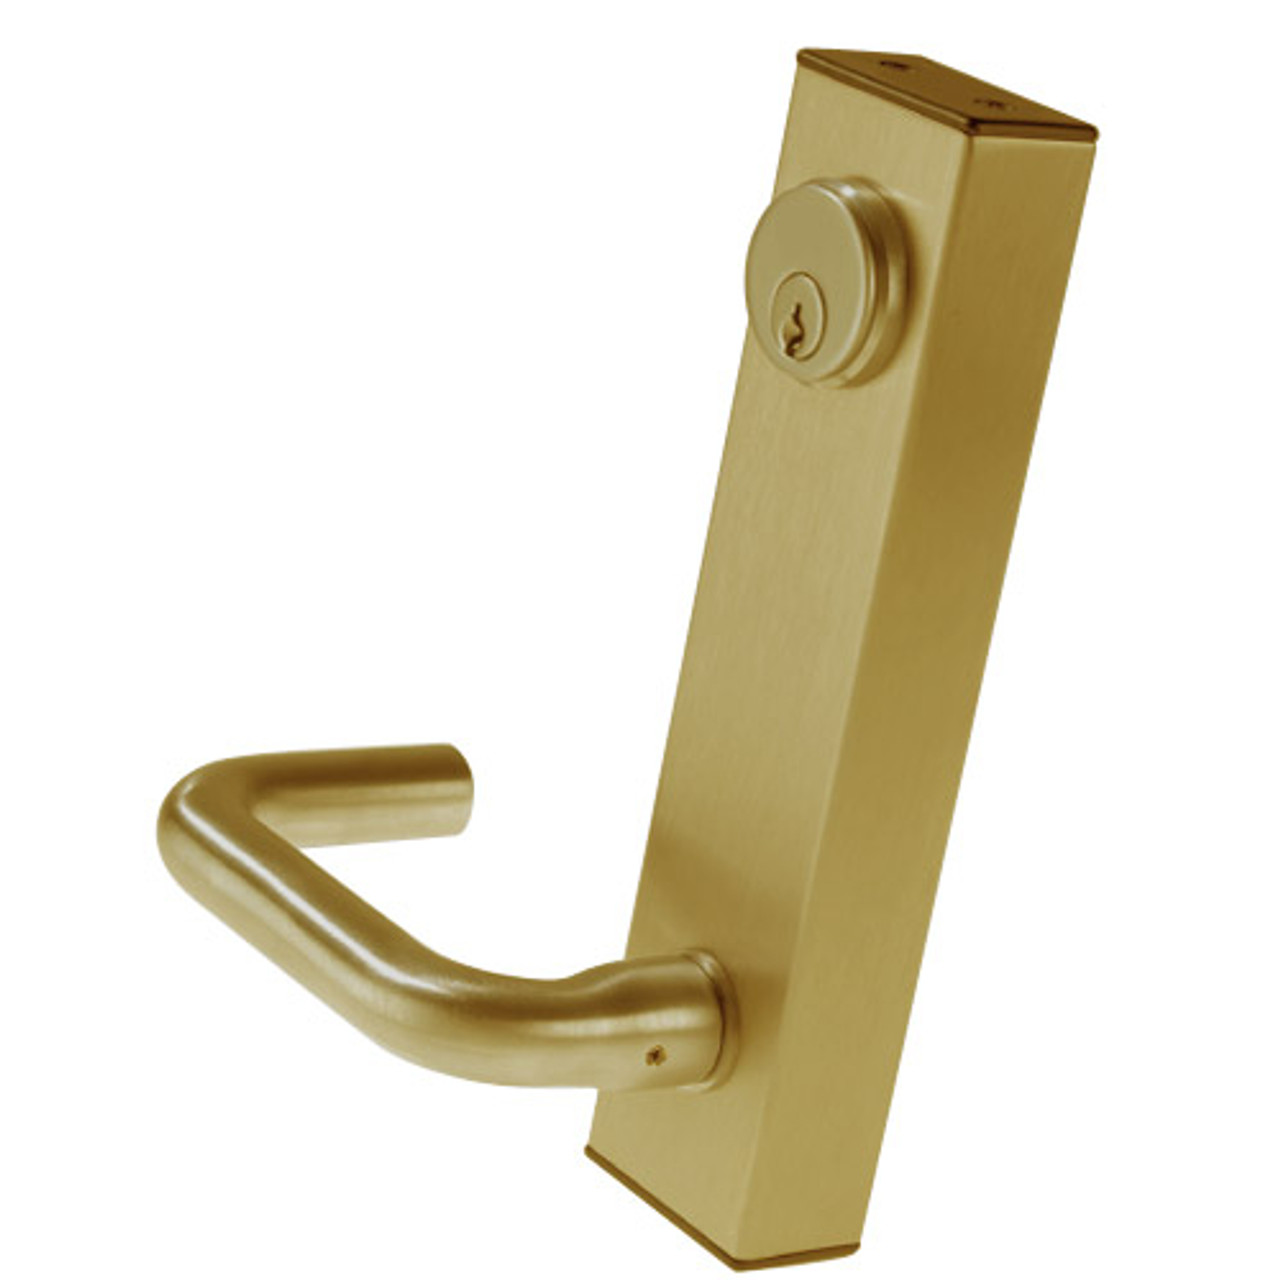 3080E-02-0-94-30 US4 Adams Rite Electrified Entry Trim with Round Lever in Satin Brass Finish